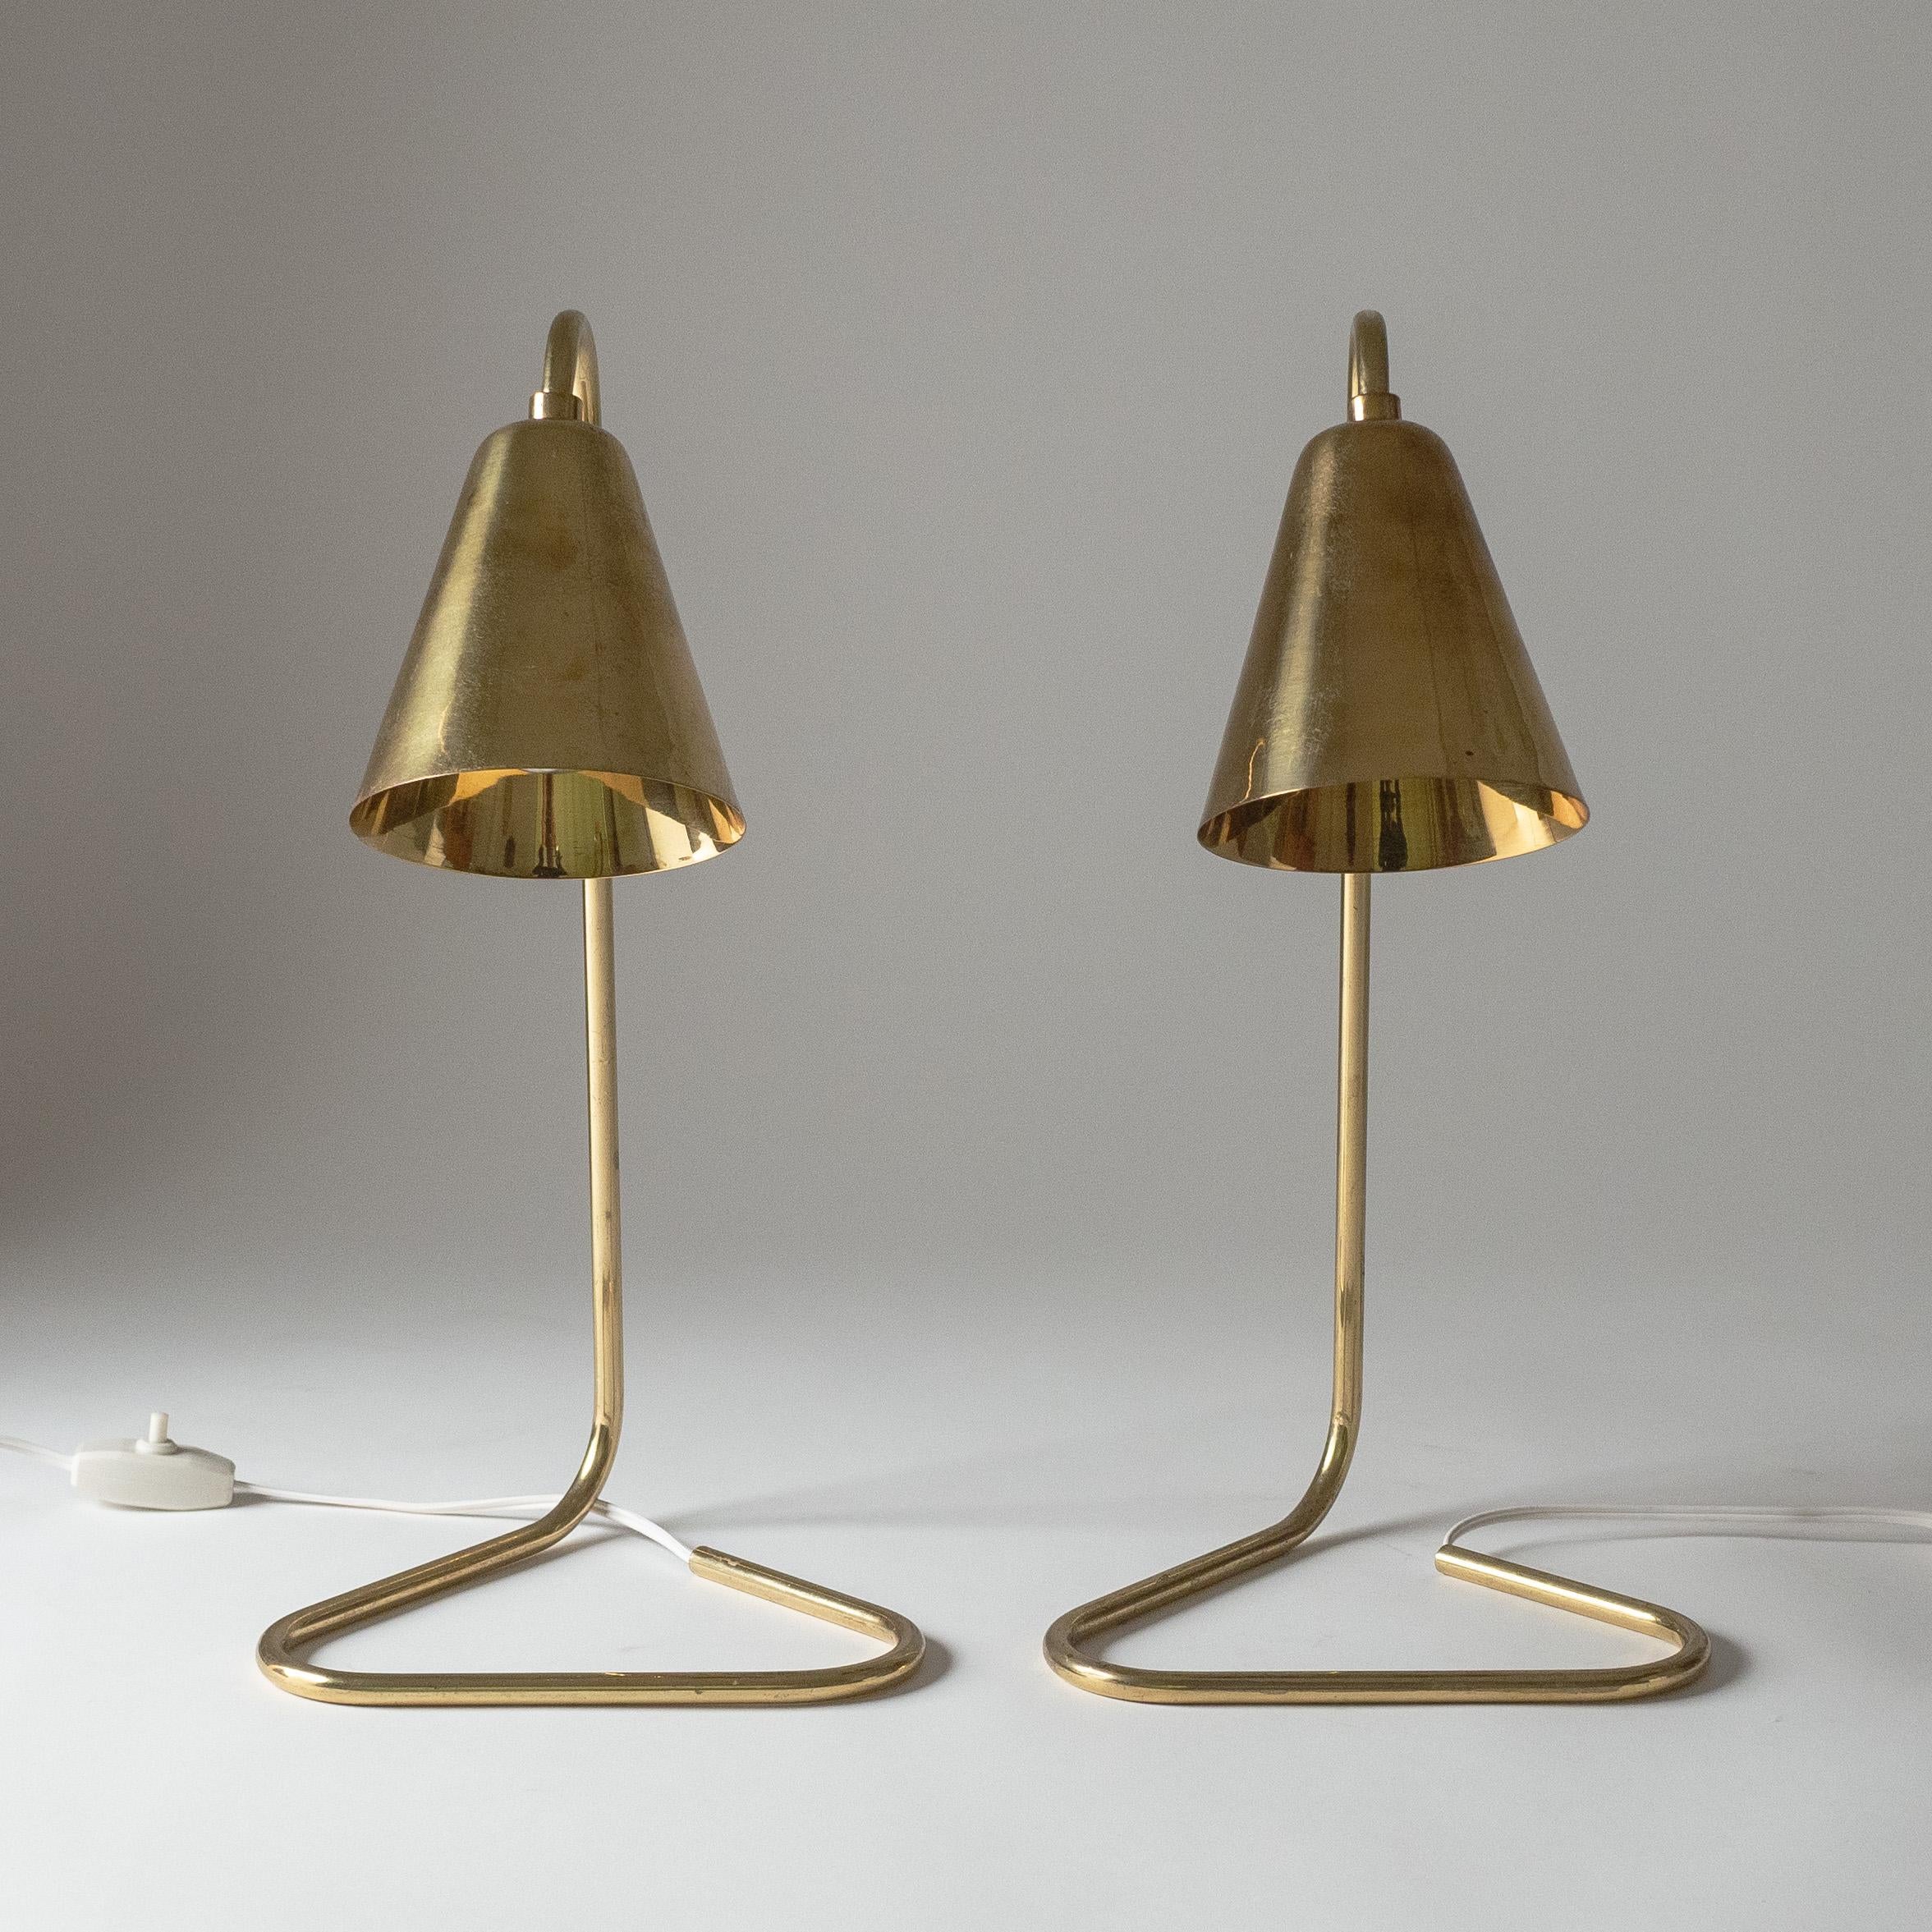 Pair of Scandinavian Brass Table Lamps, 1960s For Sale 3